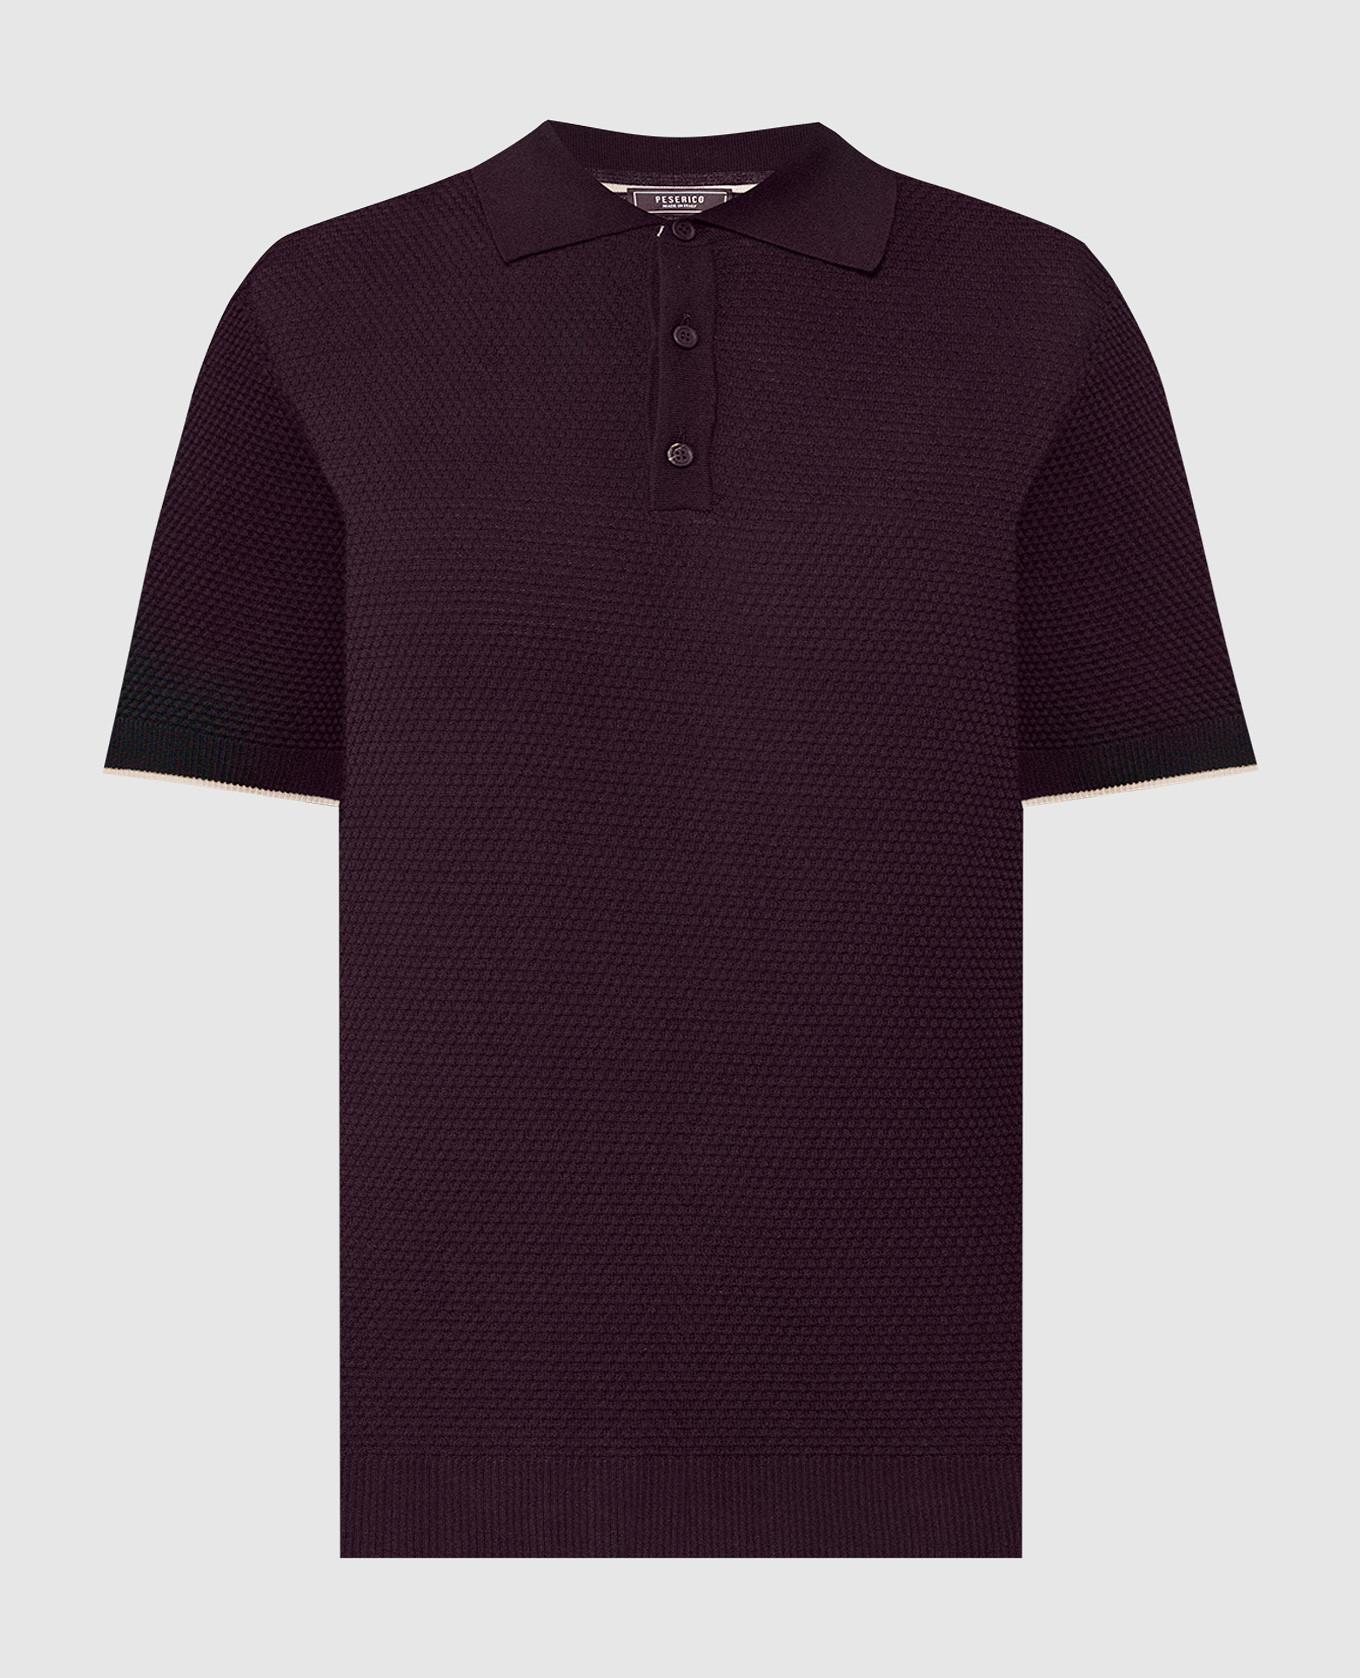 Blue polo shirt with textured pattern